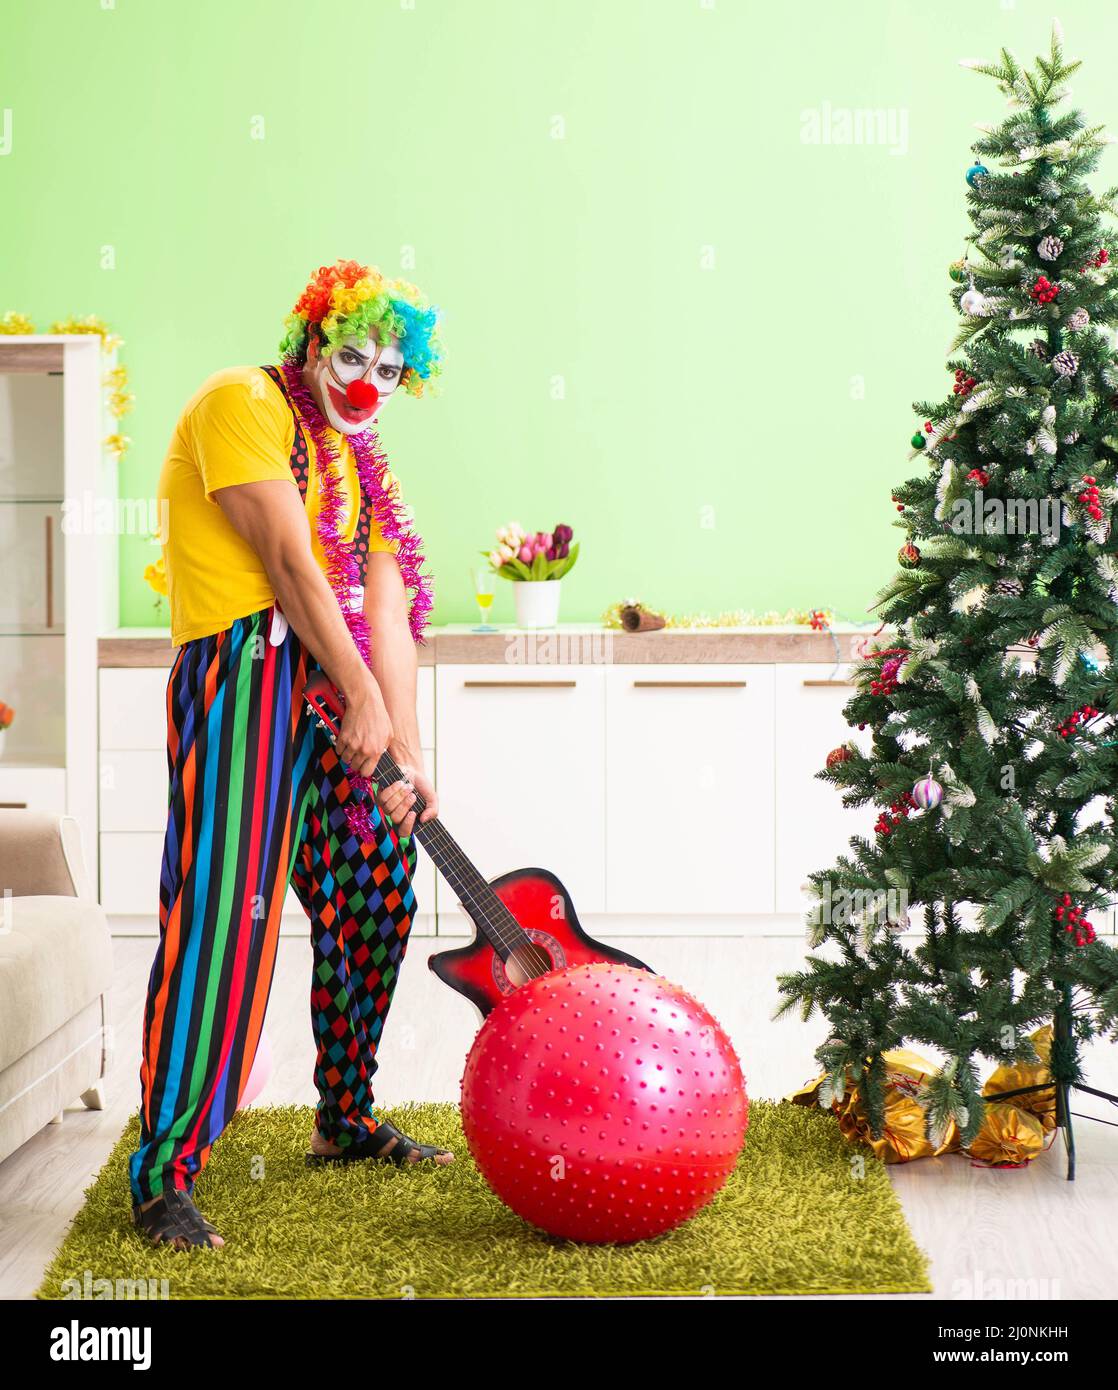 Funny clown in Christmas celebration concept Stock Photo